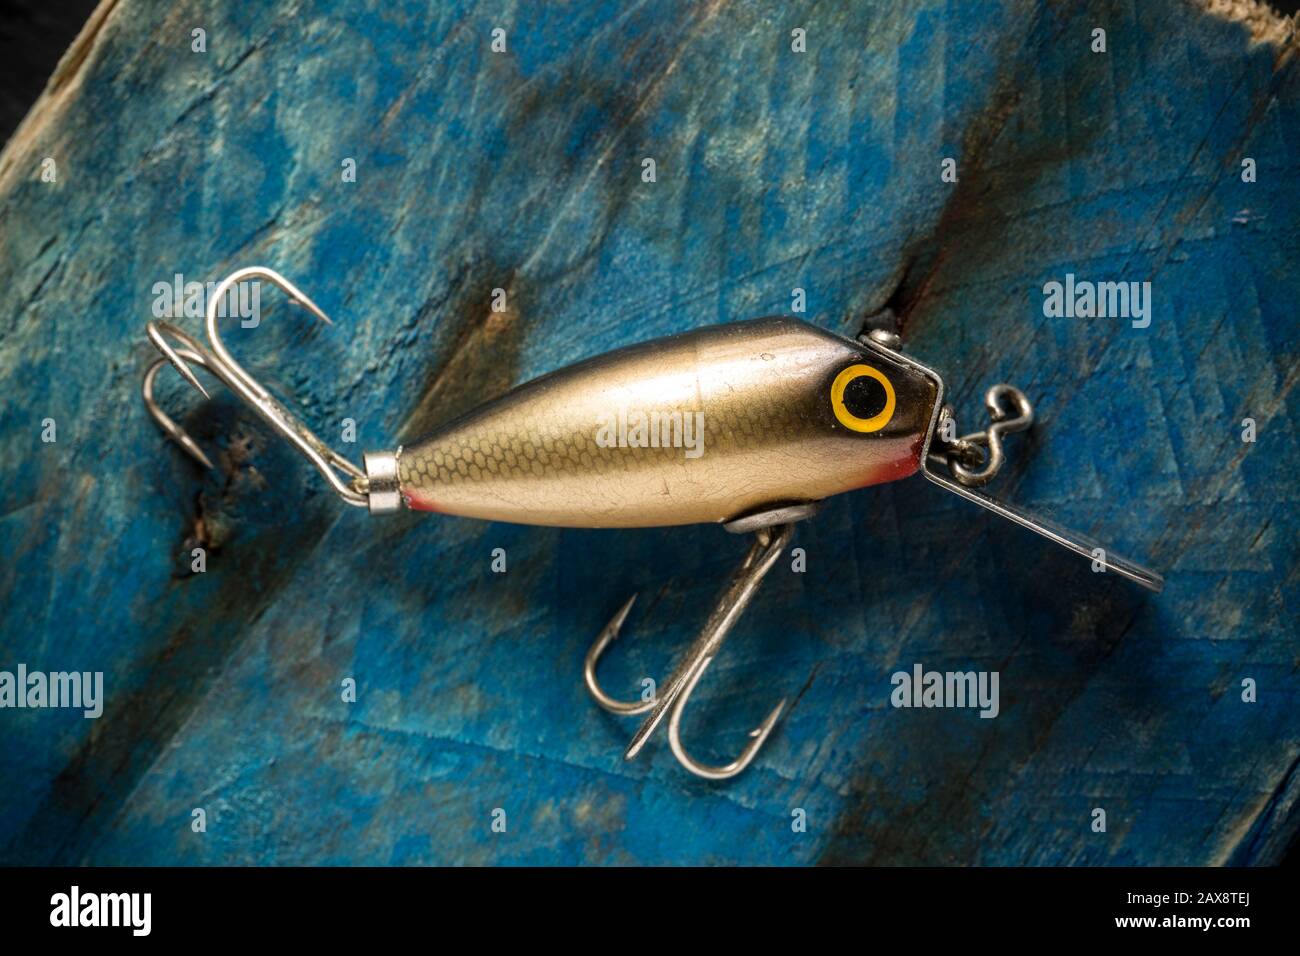 https://c8.alamy.com/comp/2AX8TEJ/an-old-fishing-lure-or-plug-equipped-with-treble-hooks-designed-to-catch-predatory-fish-the-lure-has-possibly-been-made-by-woods-mfg-but-this-cann-2AX8TEJ.jpg